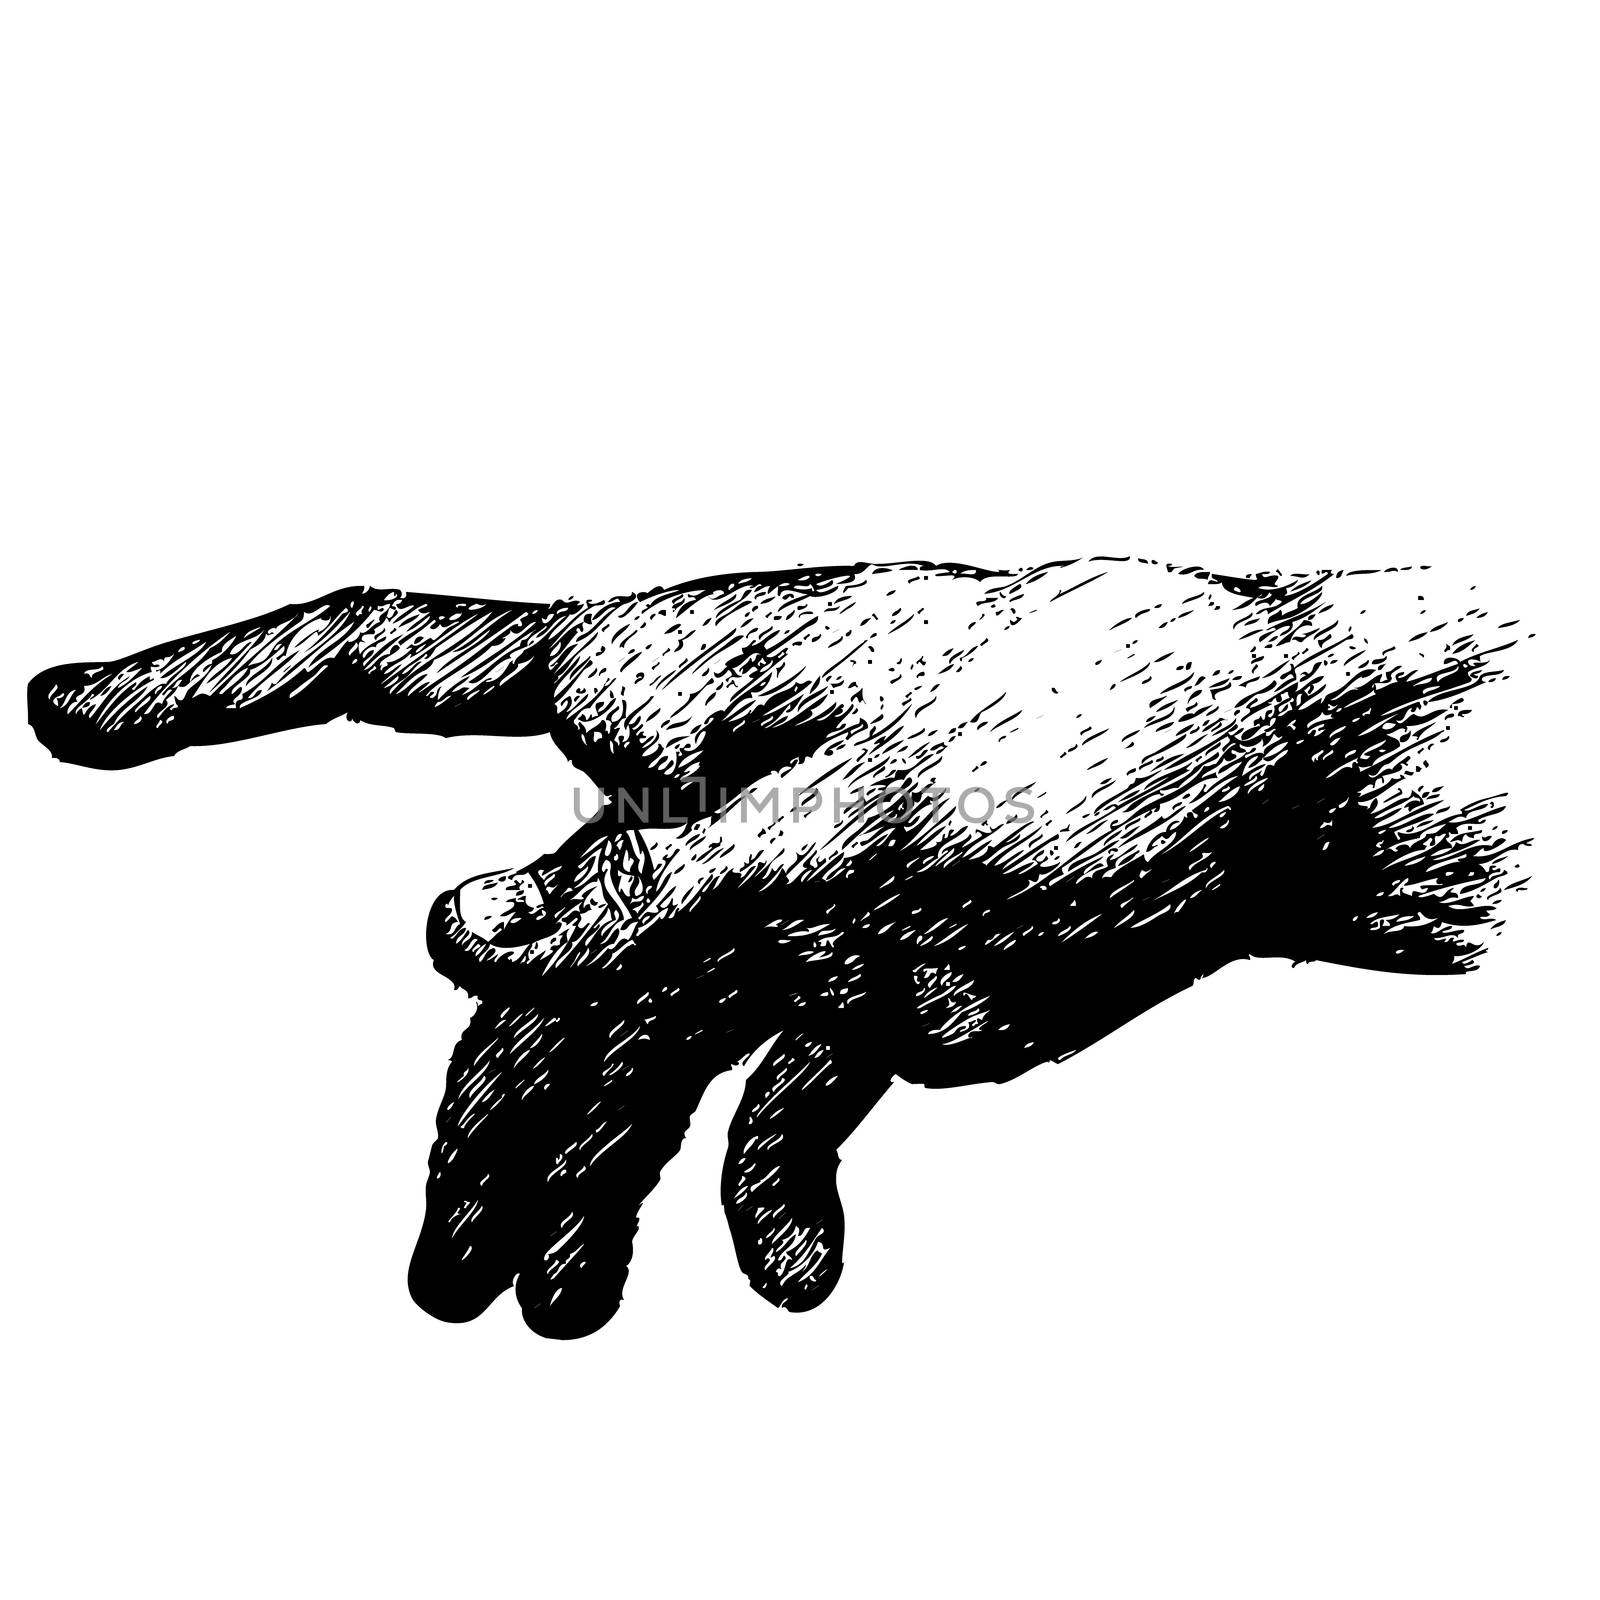 freehand sketch of human hand on white background, pointing finger